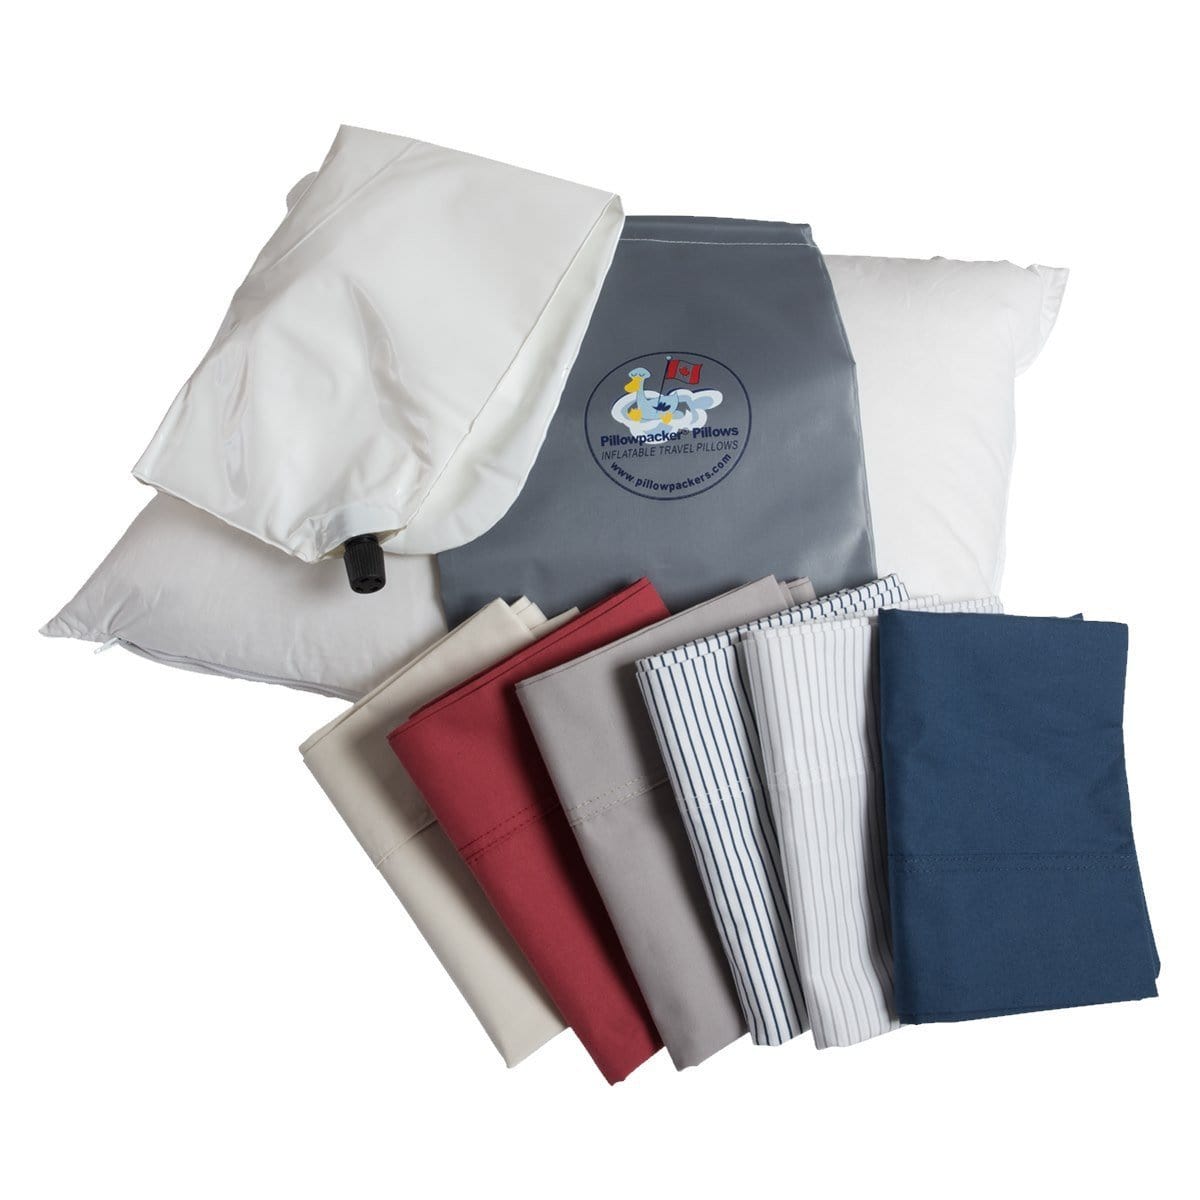 Luxurious Goose Down Inflatable Travel Pillows - Pillowpacker® Pillows - Pillowpacker Pillows